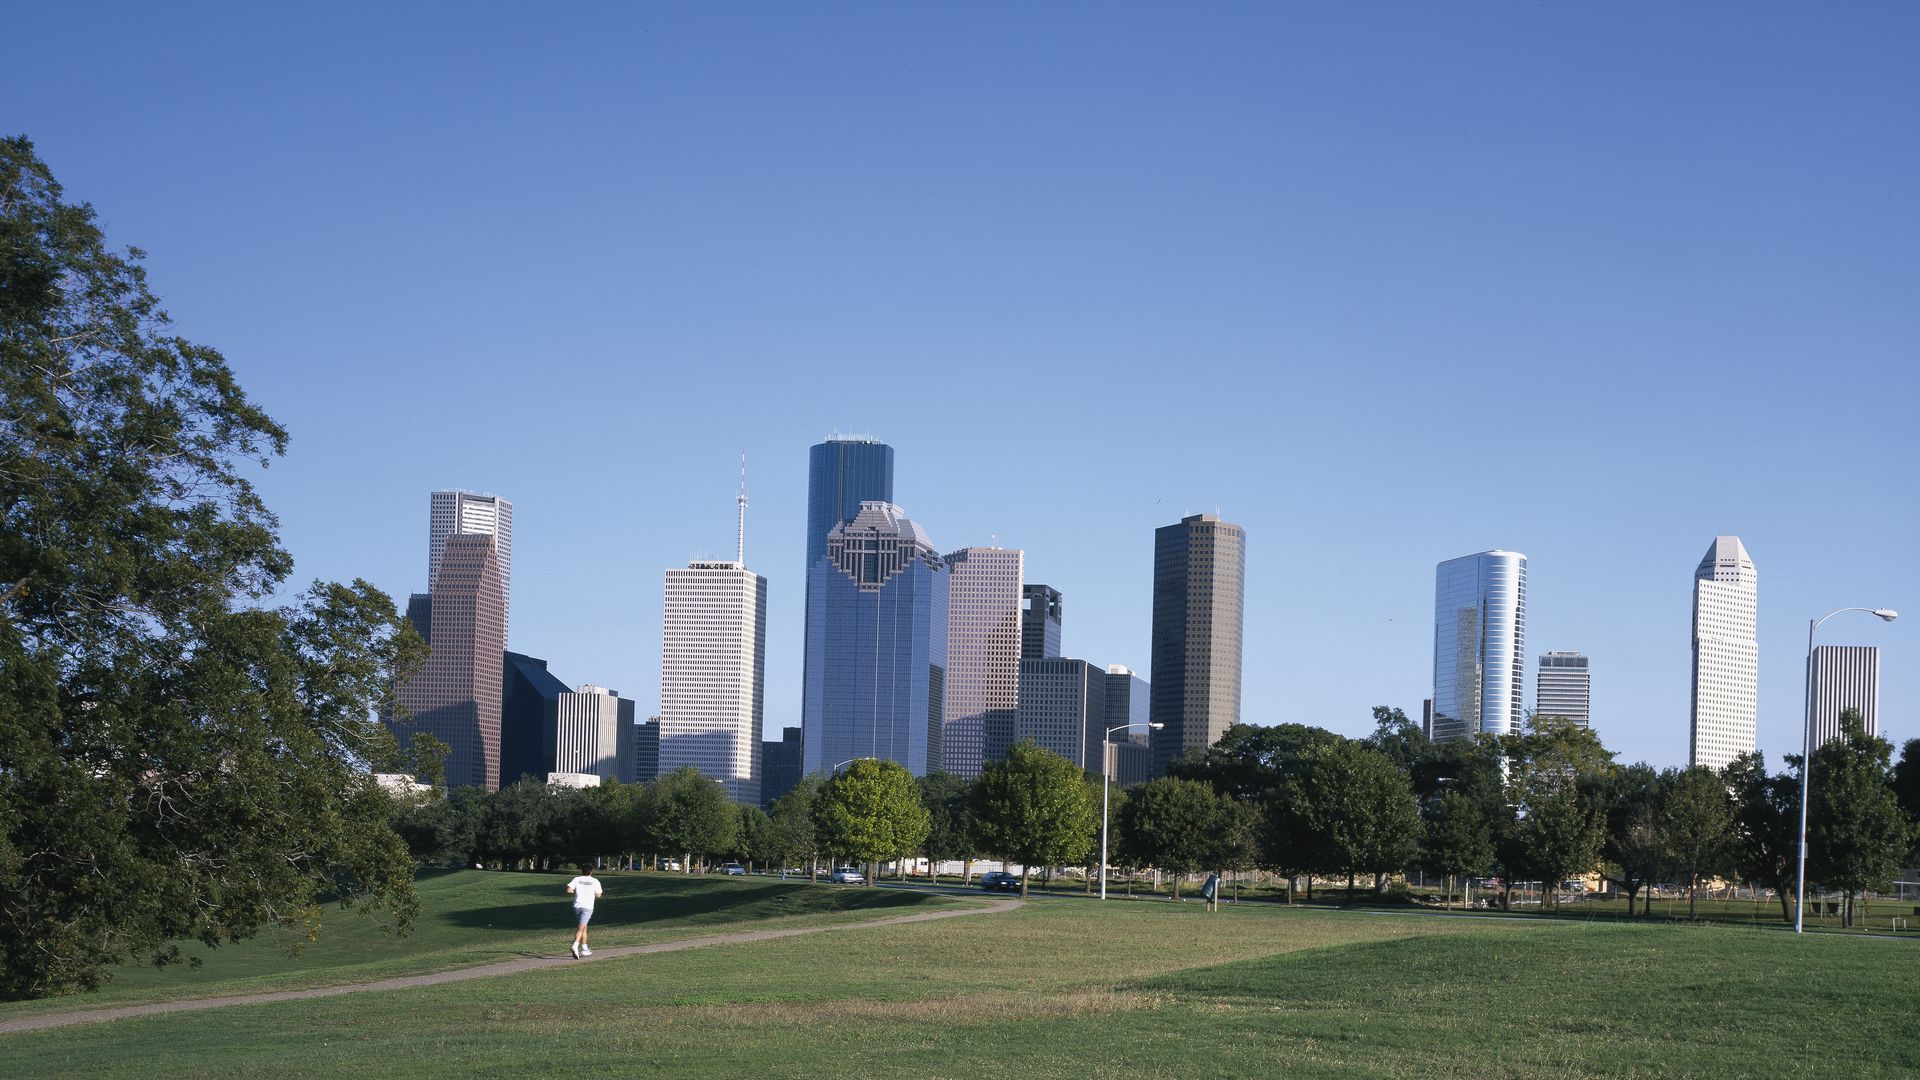 A person in the distance jogs up a path in a green meadow with the Houston skyline in the background